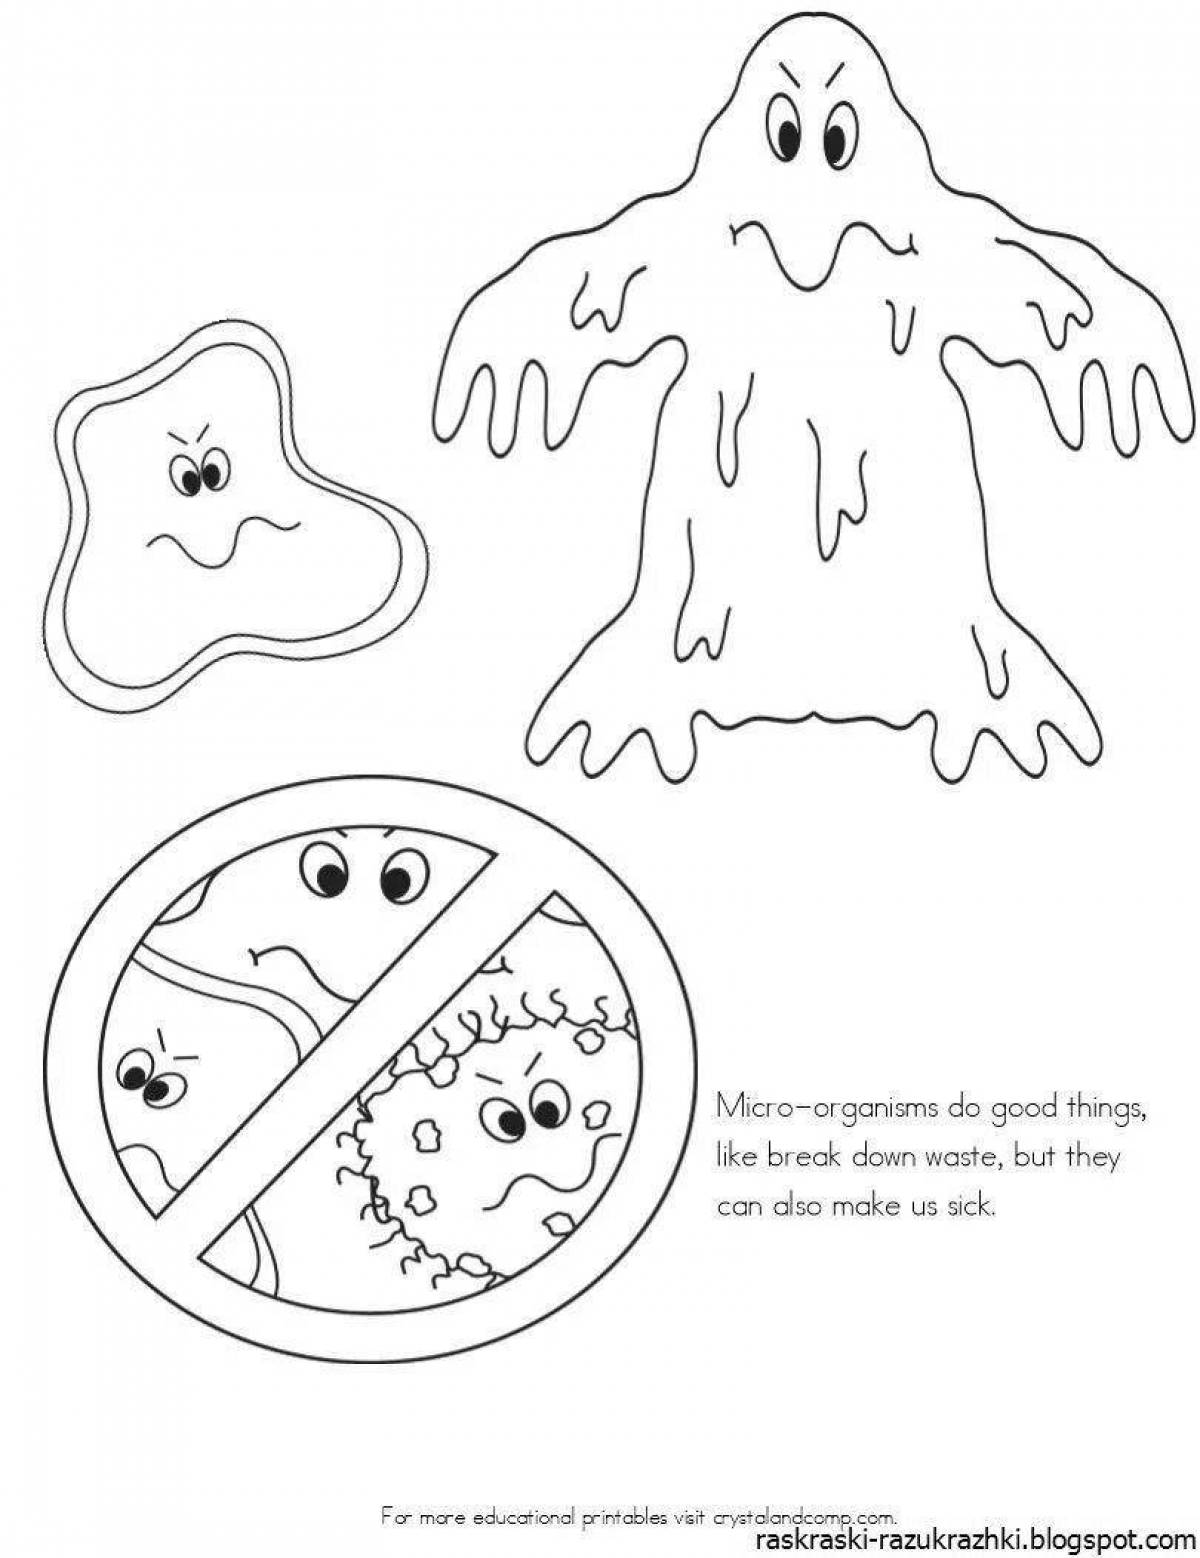 Germs coloring pages for kids